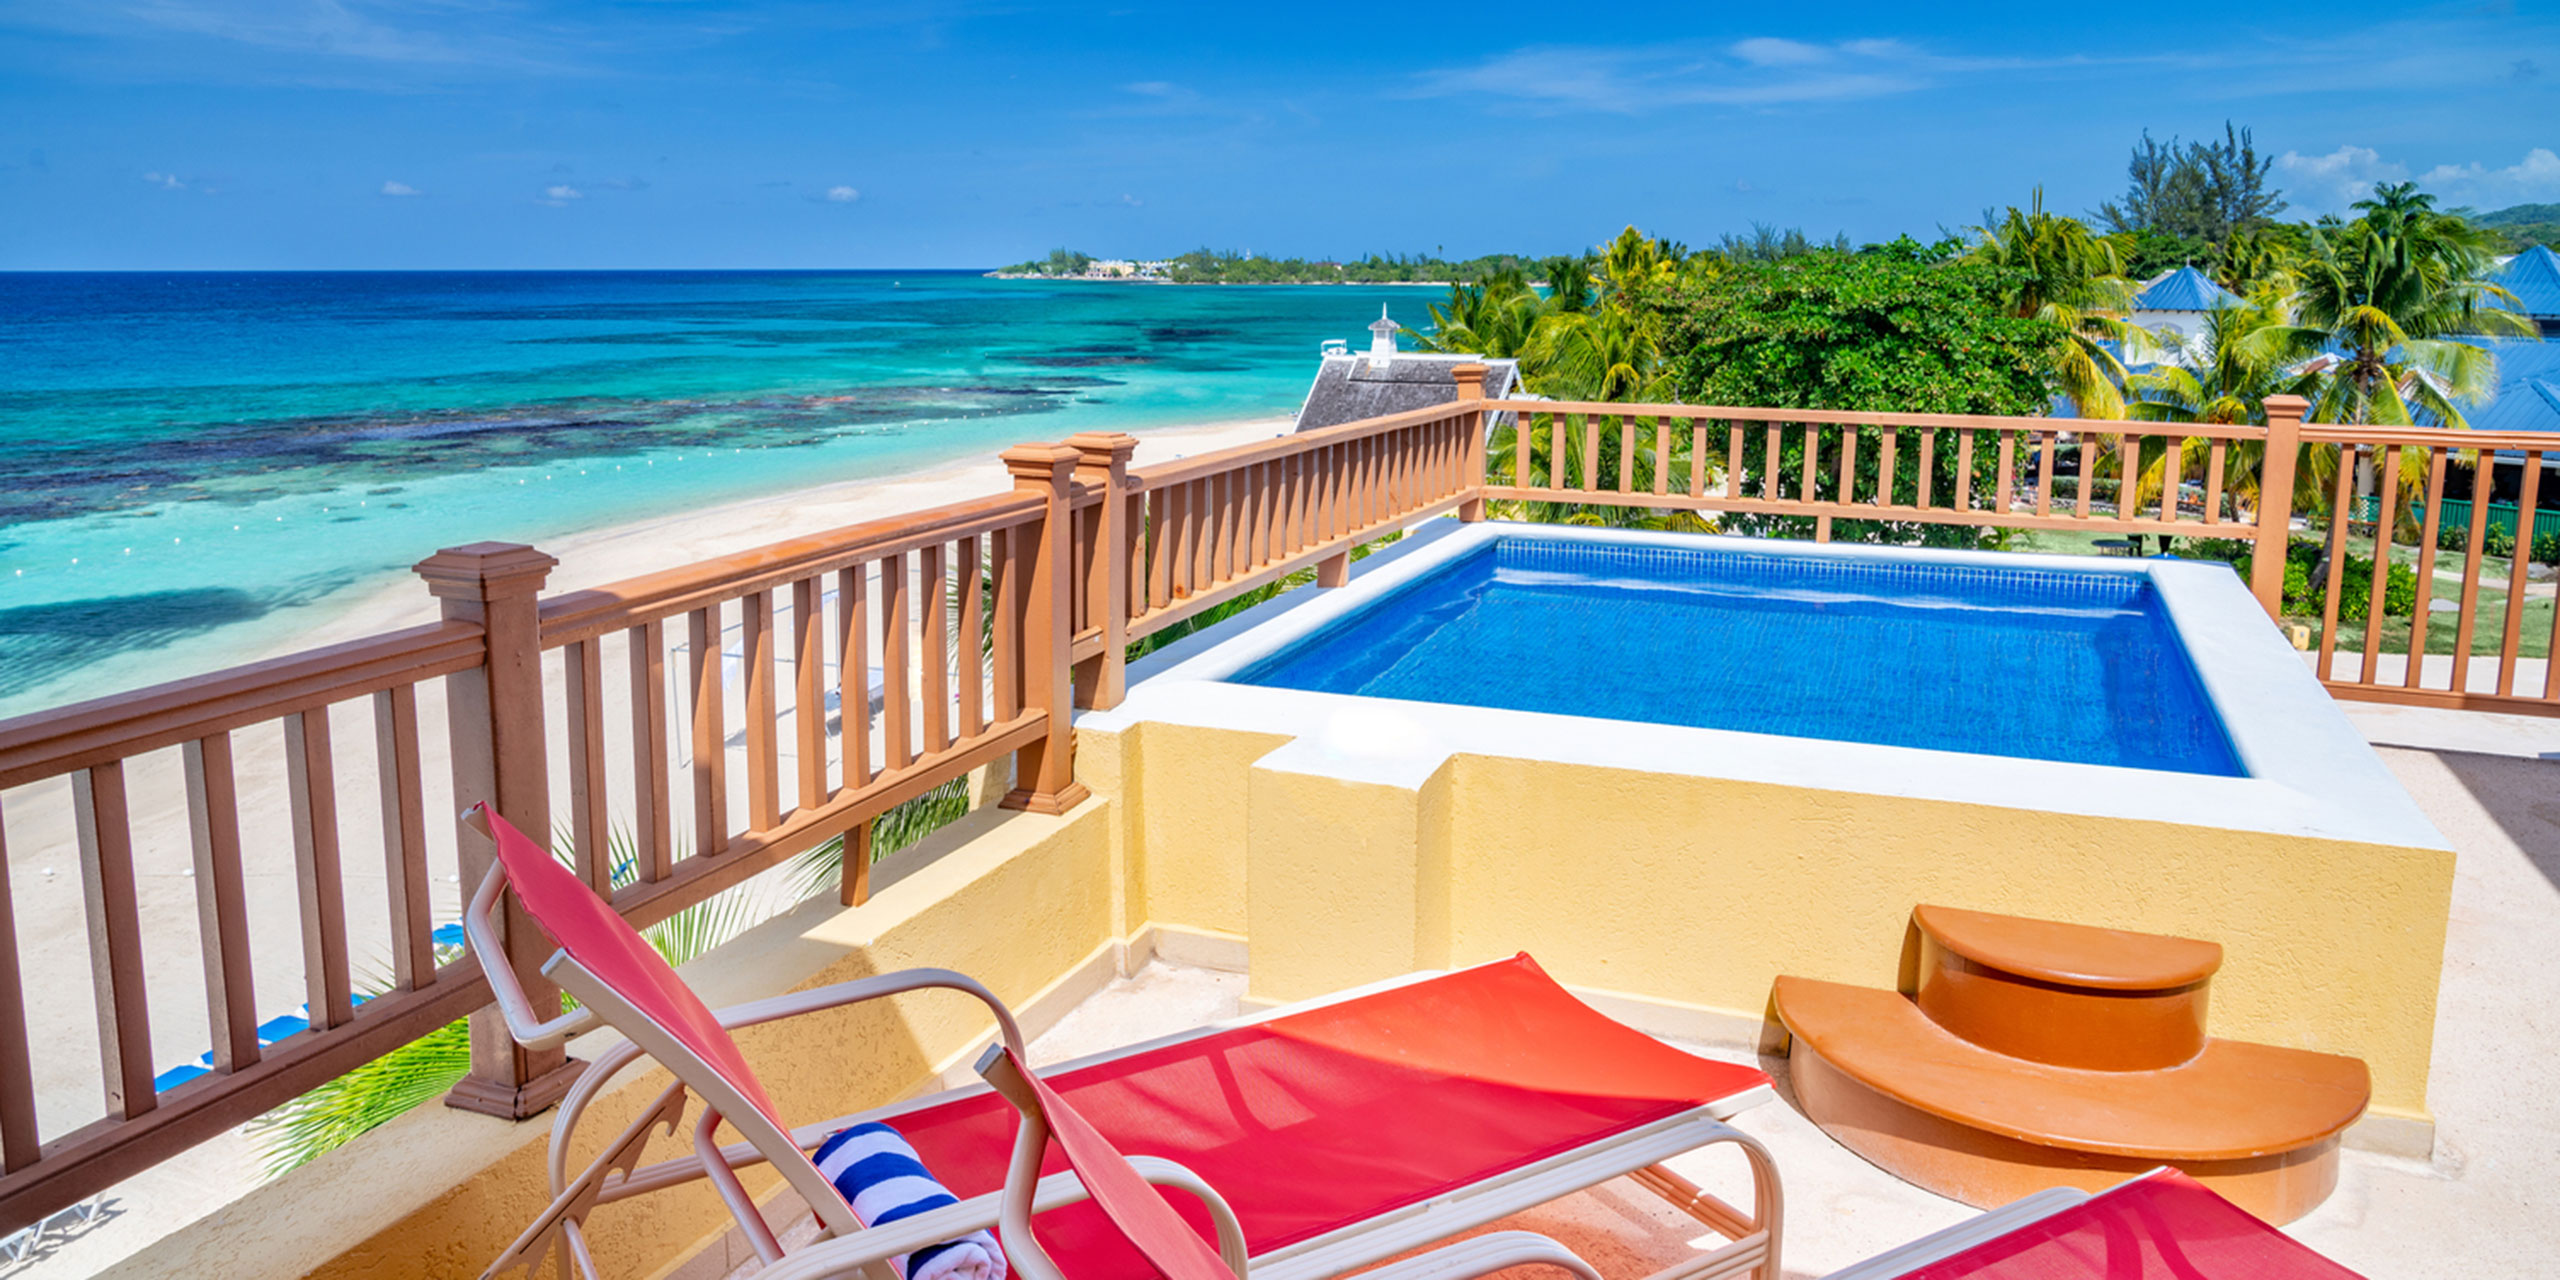 14 Best AllInclusive Resorts With Private Plunge Pools 